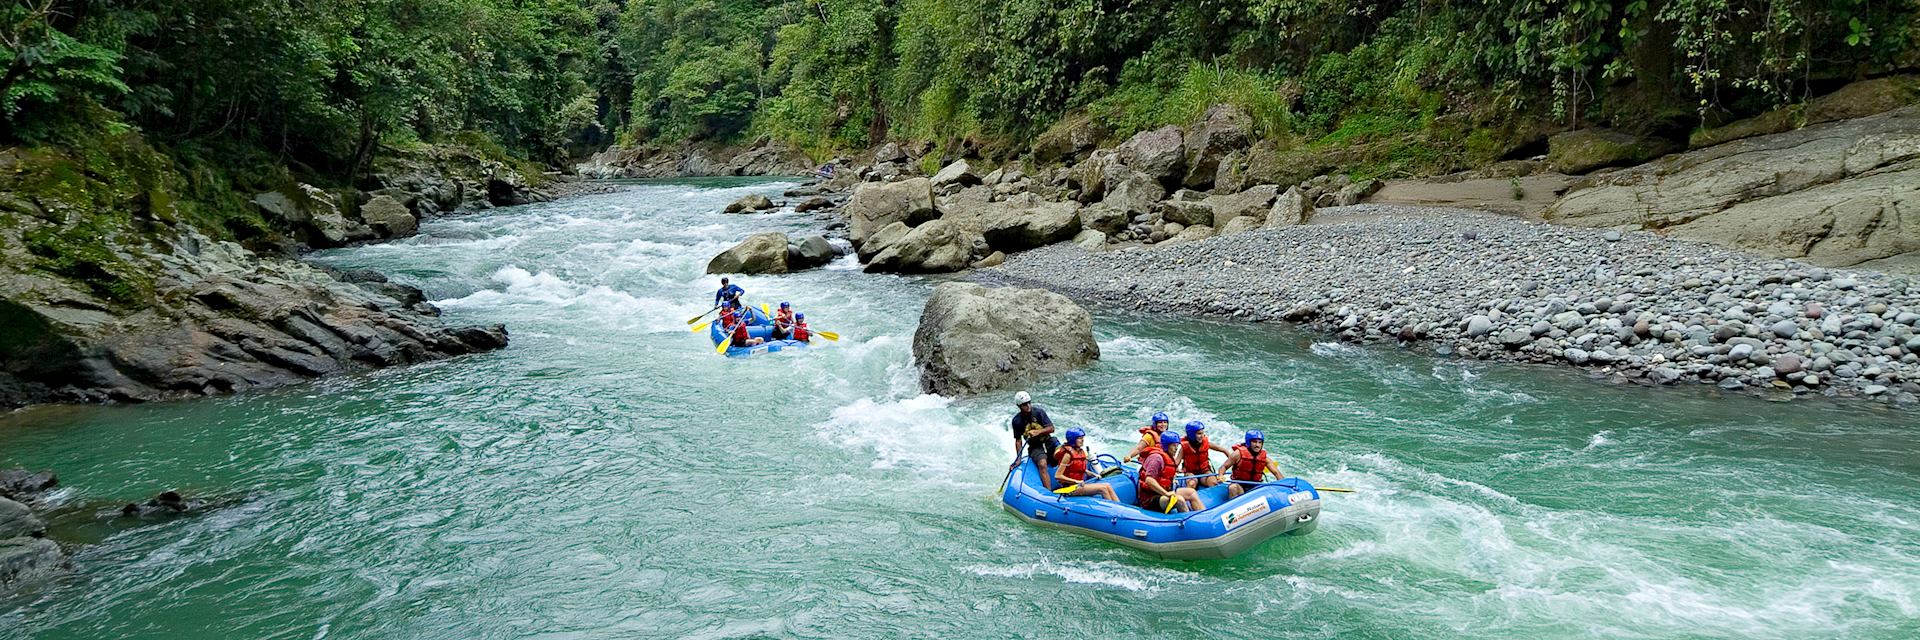 Rafting on the Pacuare River